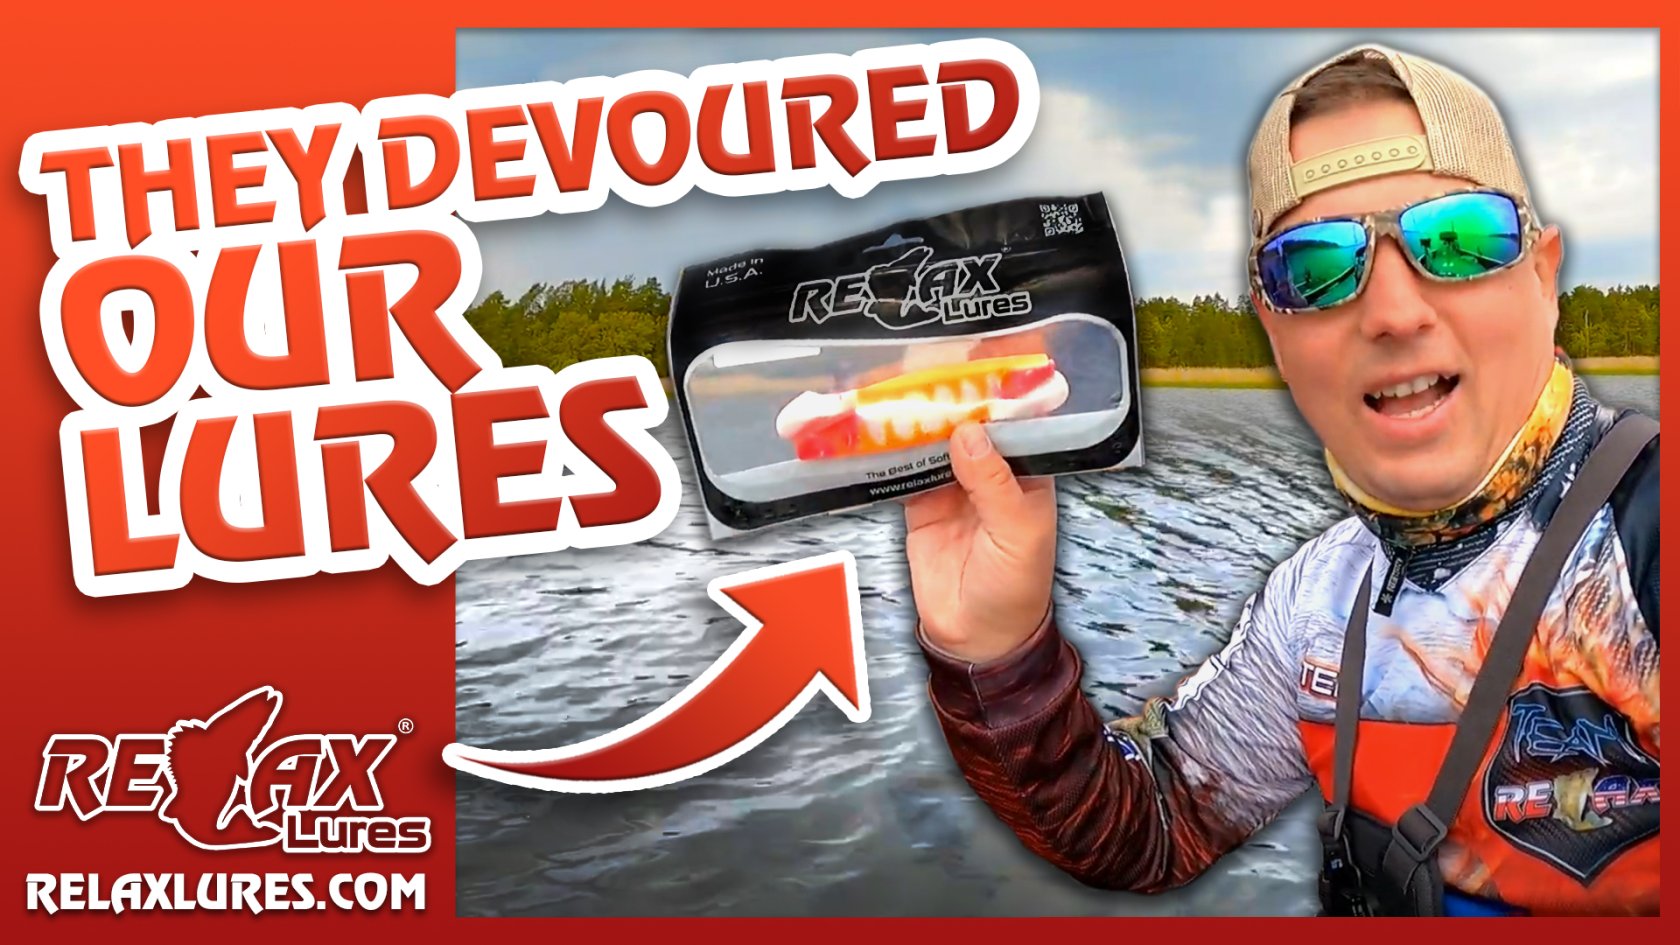 CLASSIC KOPYTO OR THE FORGOTTEN TWISTER? - RELAX LURES